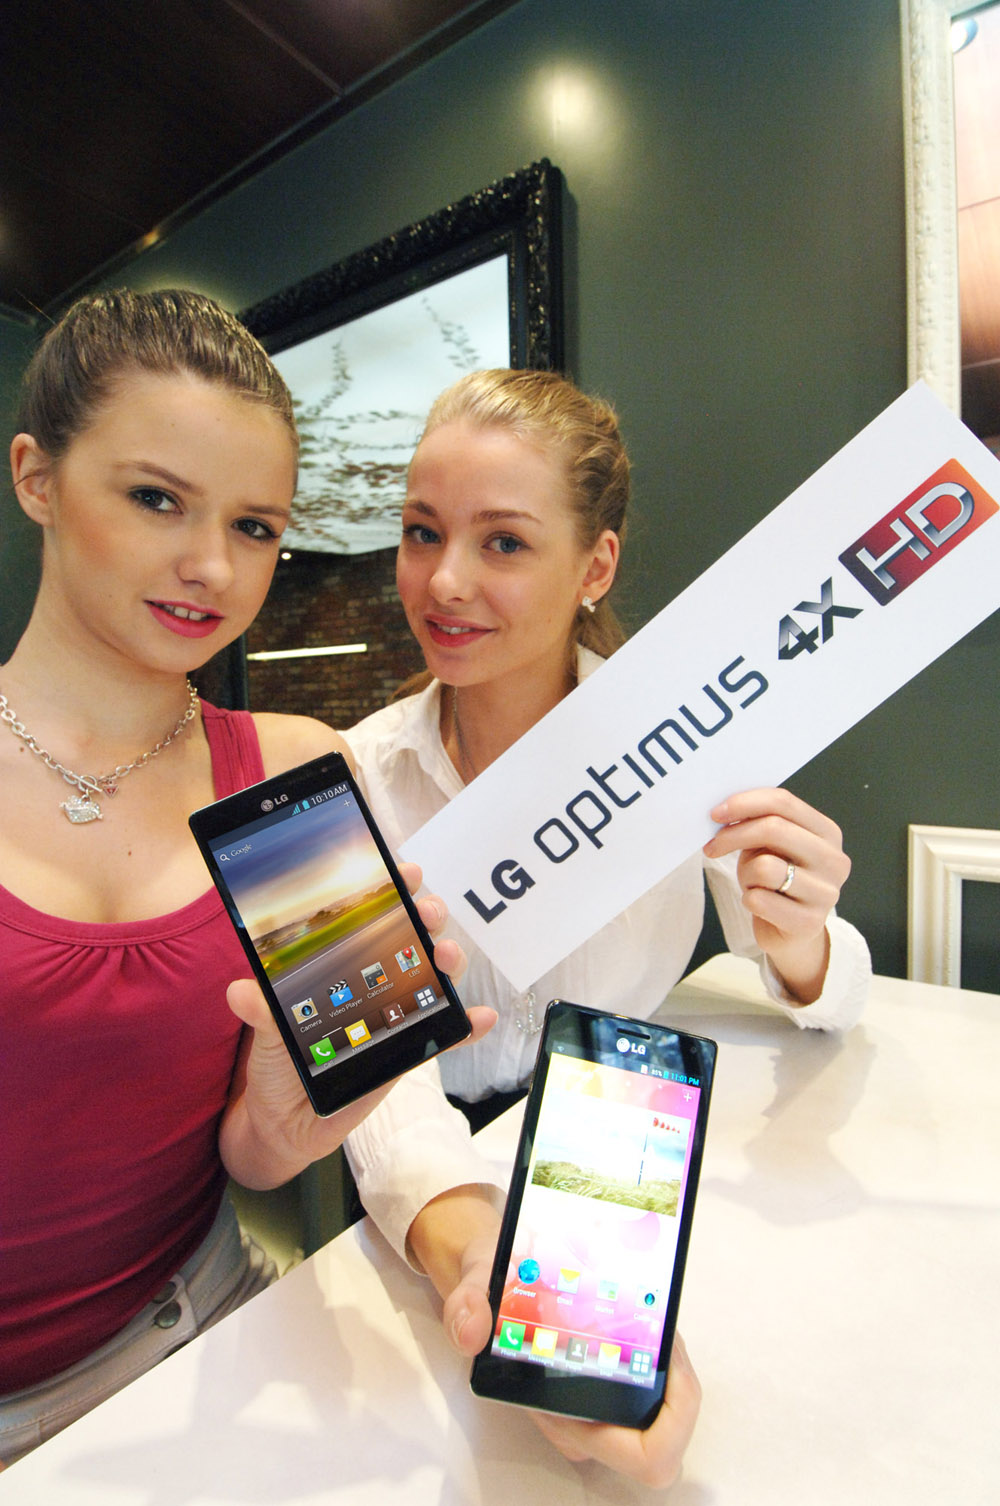 Another photo of two models holding up two LG QUAD-CORE smartphones and a promotional panel engraved with the brand name LG OPTMUS 4X HD